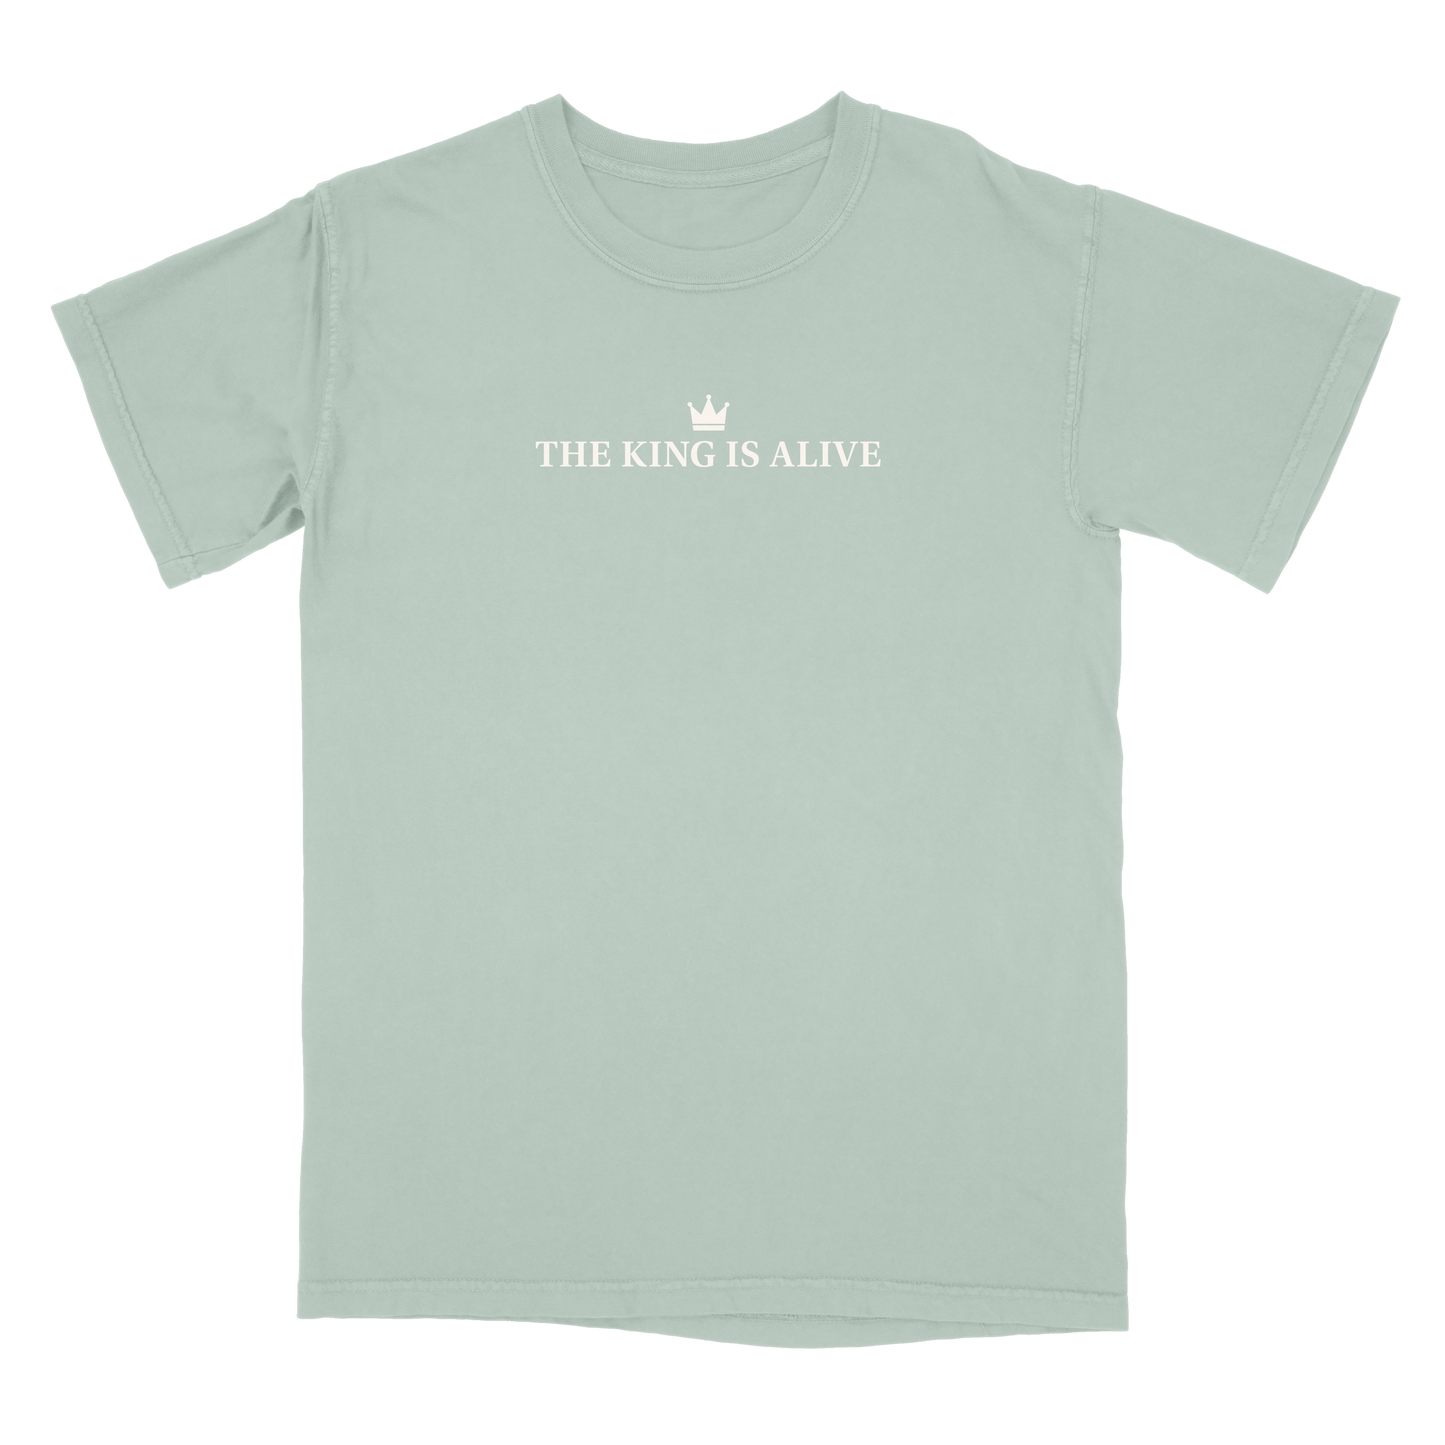 The King is Alive         ( t-shirt )